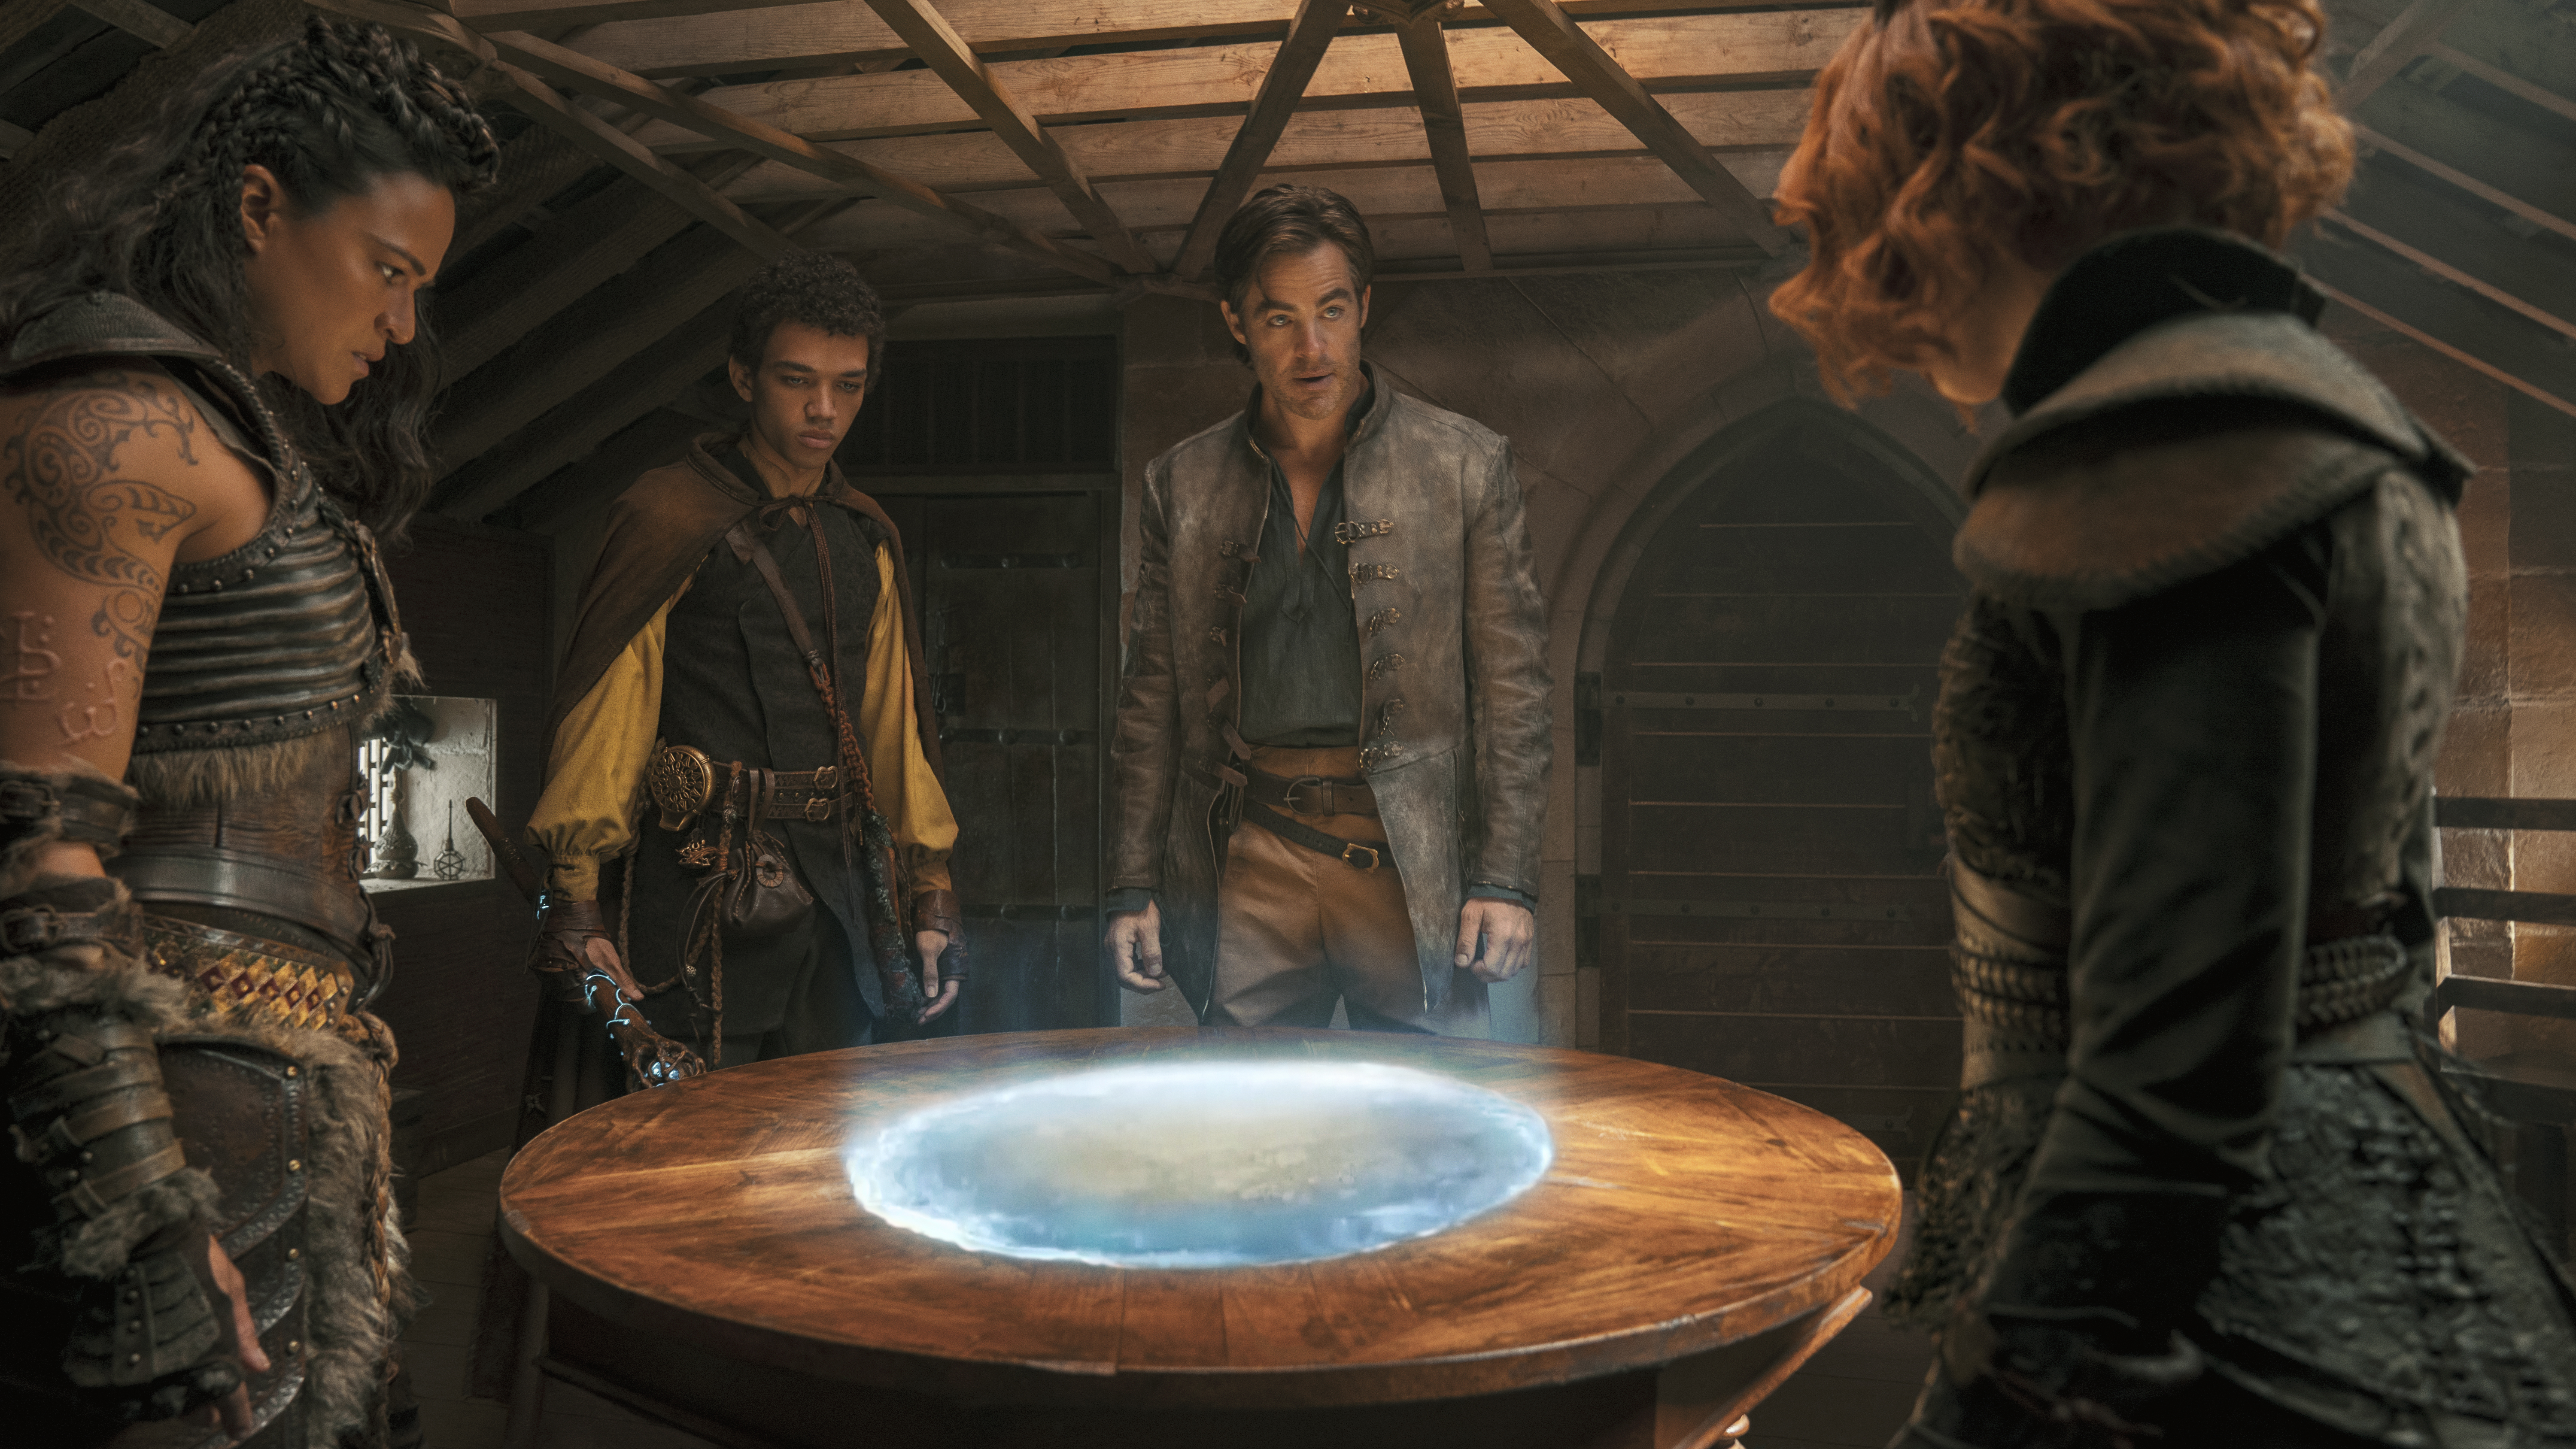 A grubby, battered D&amp;D party (Michelle Rodriguez, Justice Smith, Chris Pine, and Sophia Lillis) gather around a glowing circular map in a scene from Dungeons &amp; Dragons: Honor Among Thieves